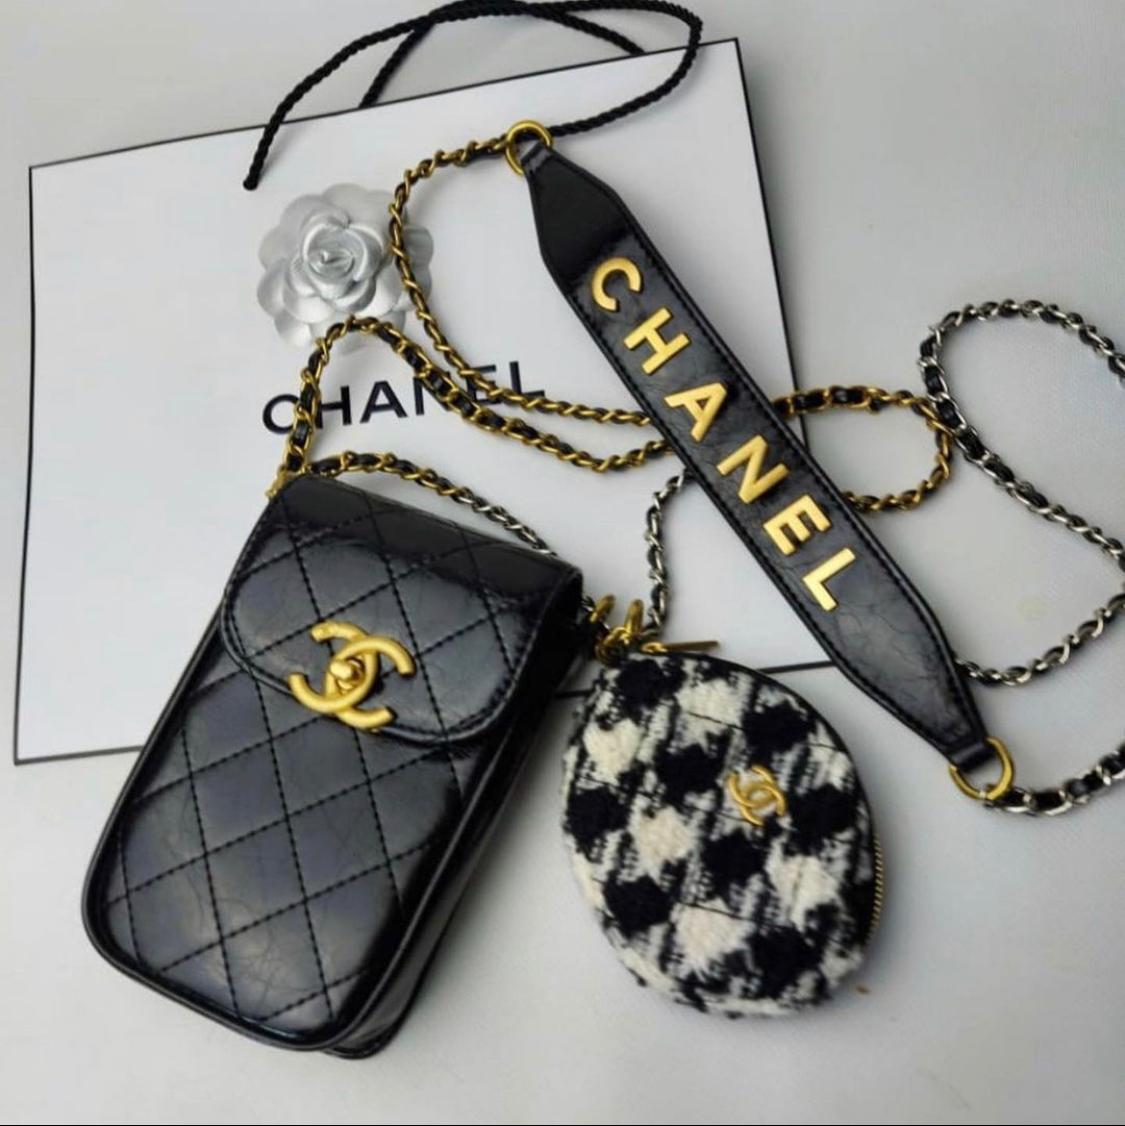 Precision VIP Authentic Chanel Bag And Bambam Bag Brand New for